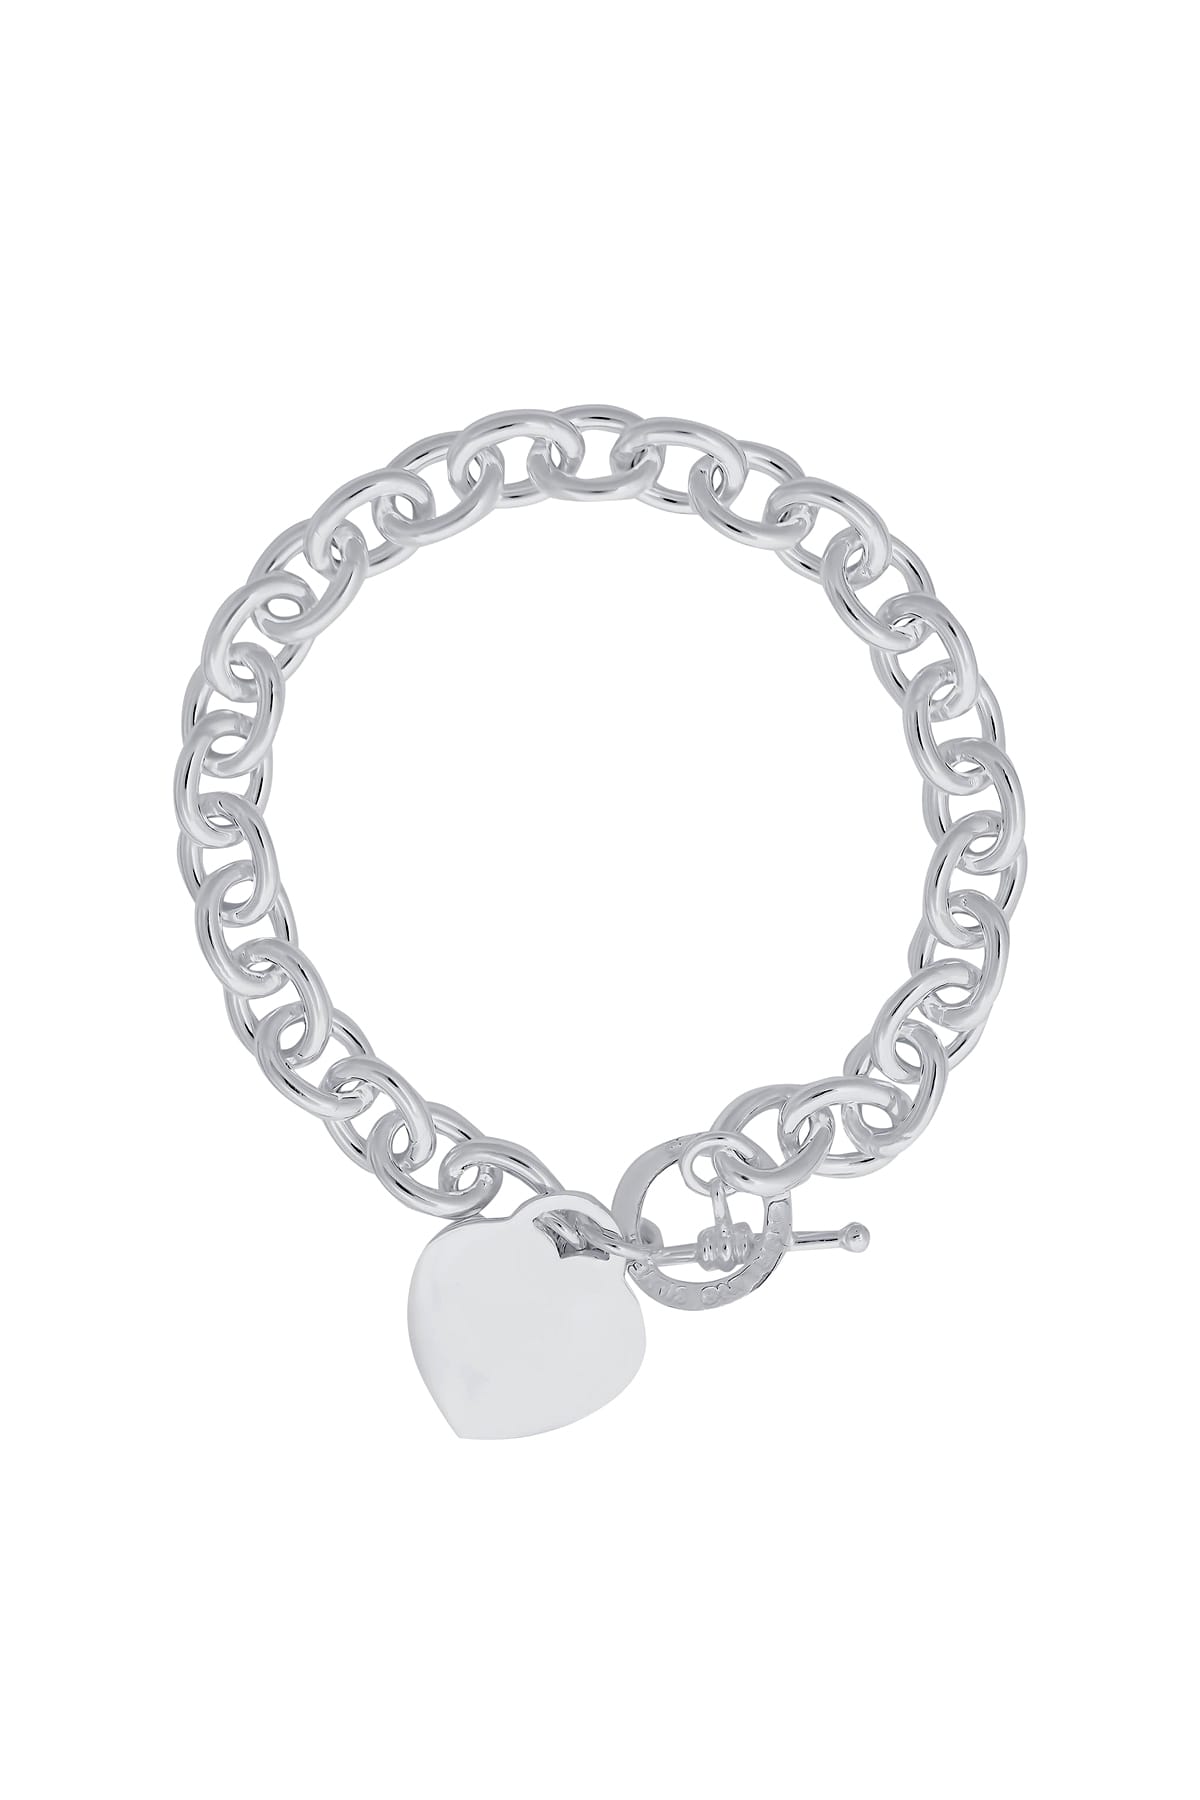 Sterling Silver Oval Cable Bracelet with Ring & Heart available at LeGassick Diamonds and Jewellery Gold Coast, Australia.